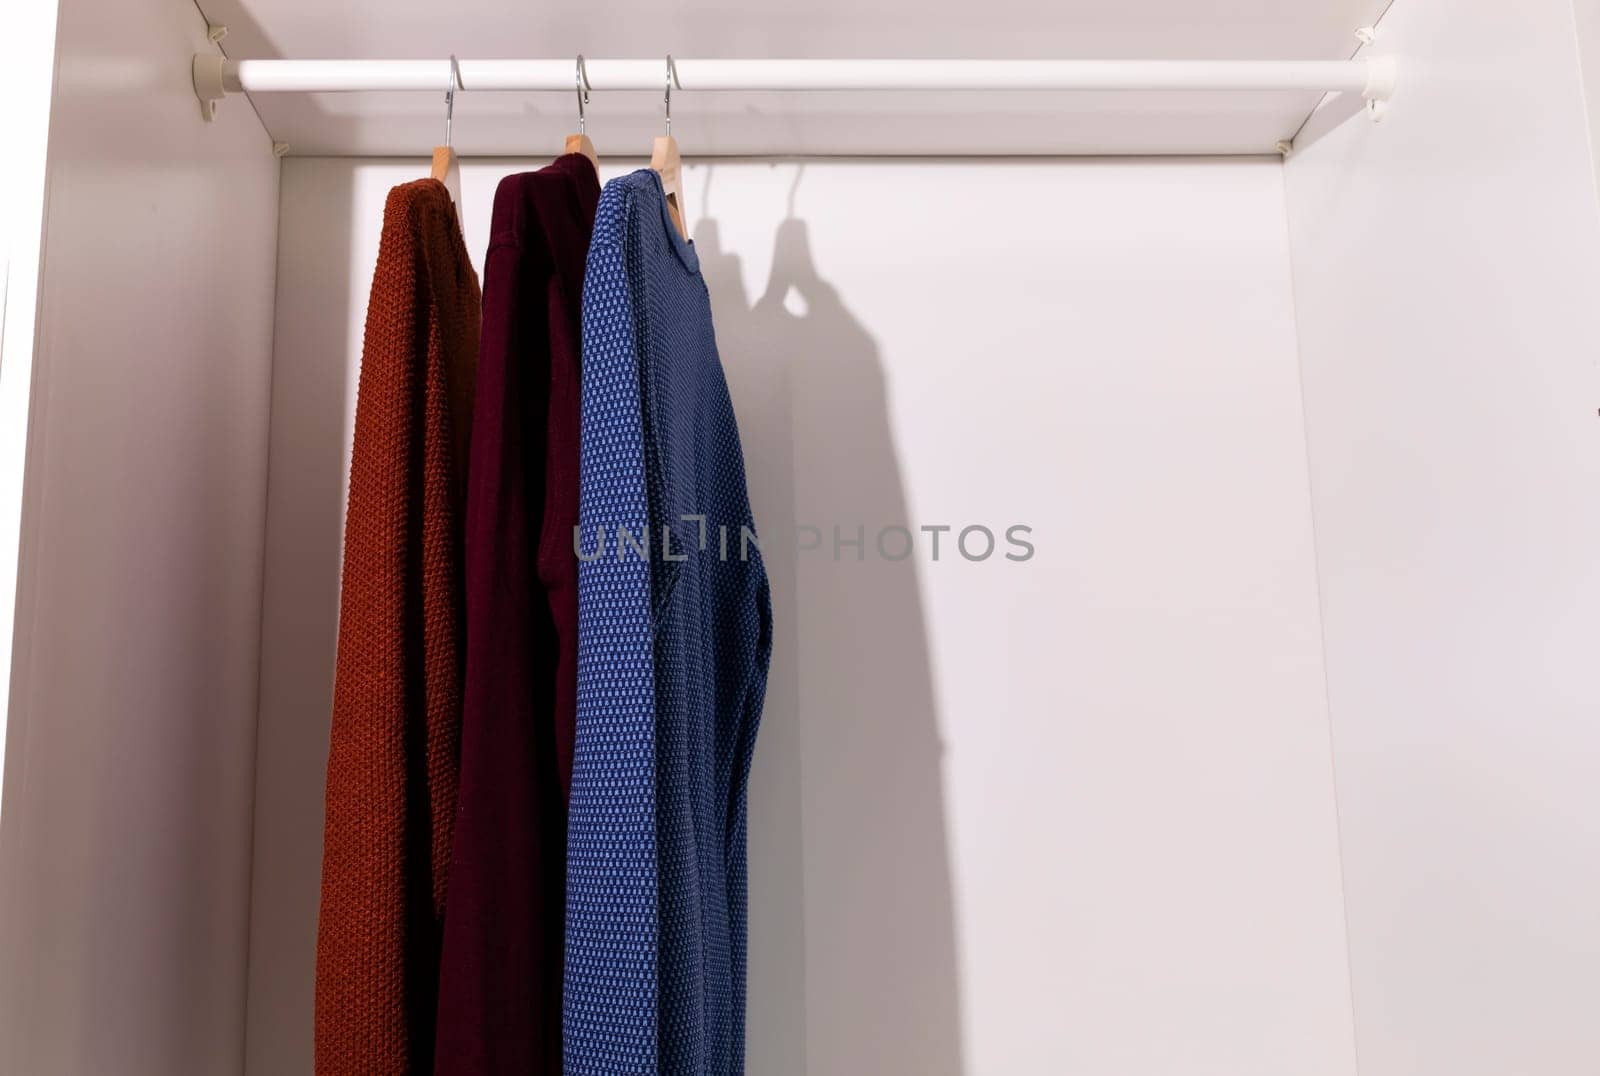 Hanging Men's Knitted Sweater or Cardigan in Closet, Stylish Male Casual Warm Cotton Clothes on Hangers in Wardrobe. Copy Space For Text. Horizontal Plane High quality photo